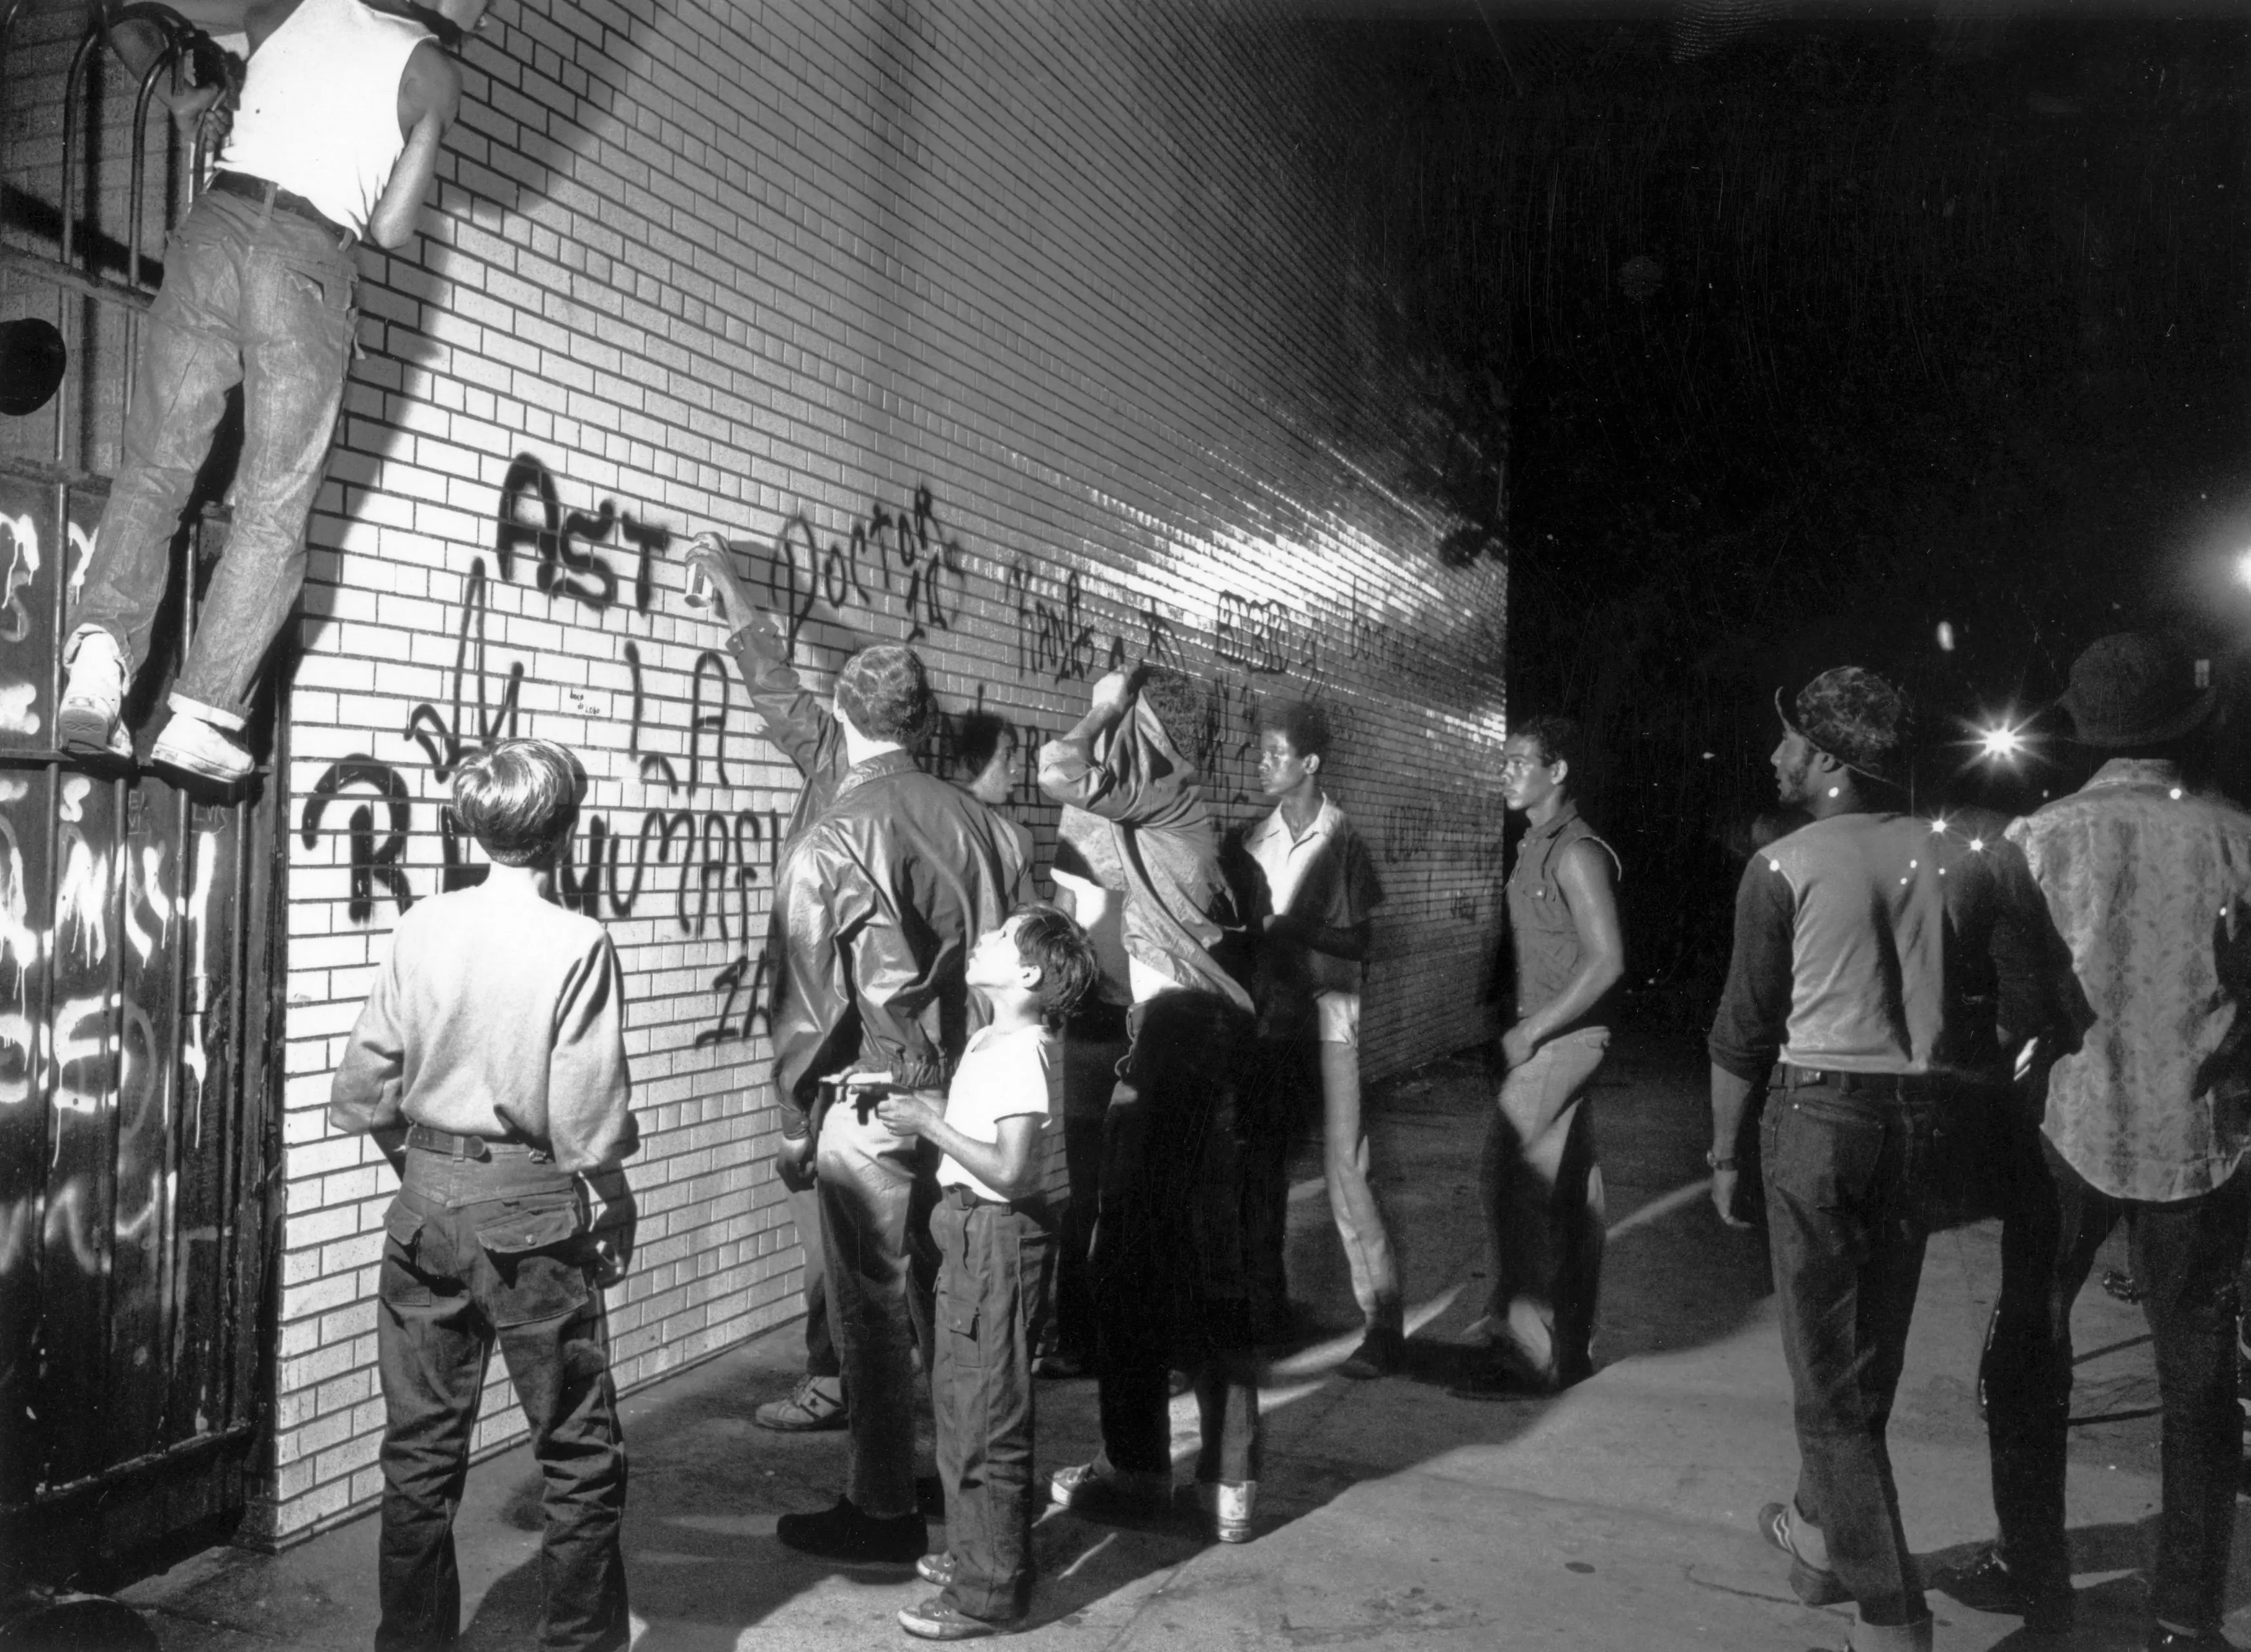 July 1972:  A group of youths spraypaint graffiti on a New York wall.  (Photo by F. Roy Kemp/BIPs/Getty Images)